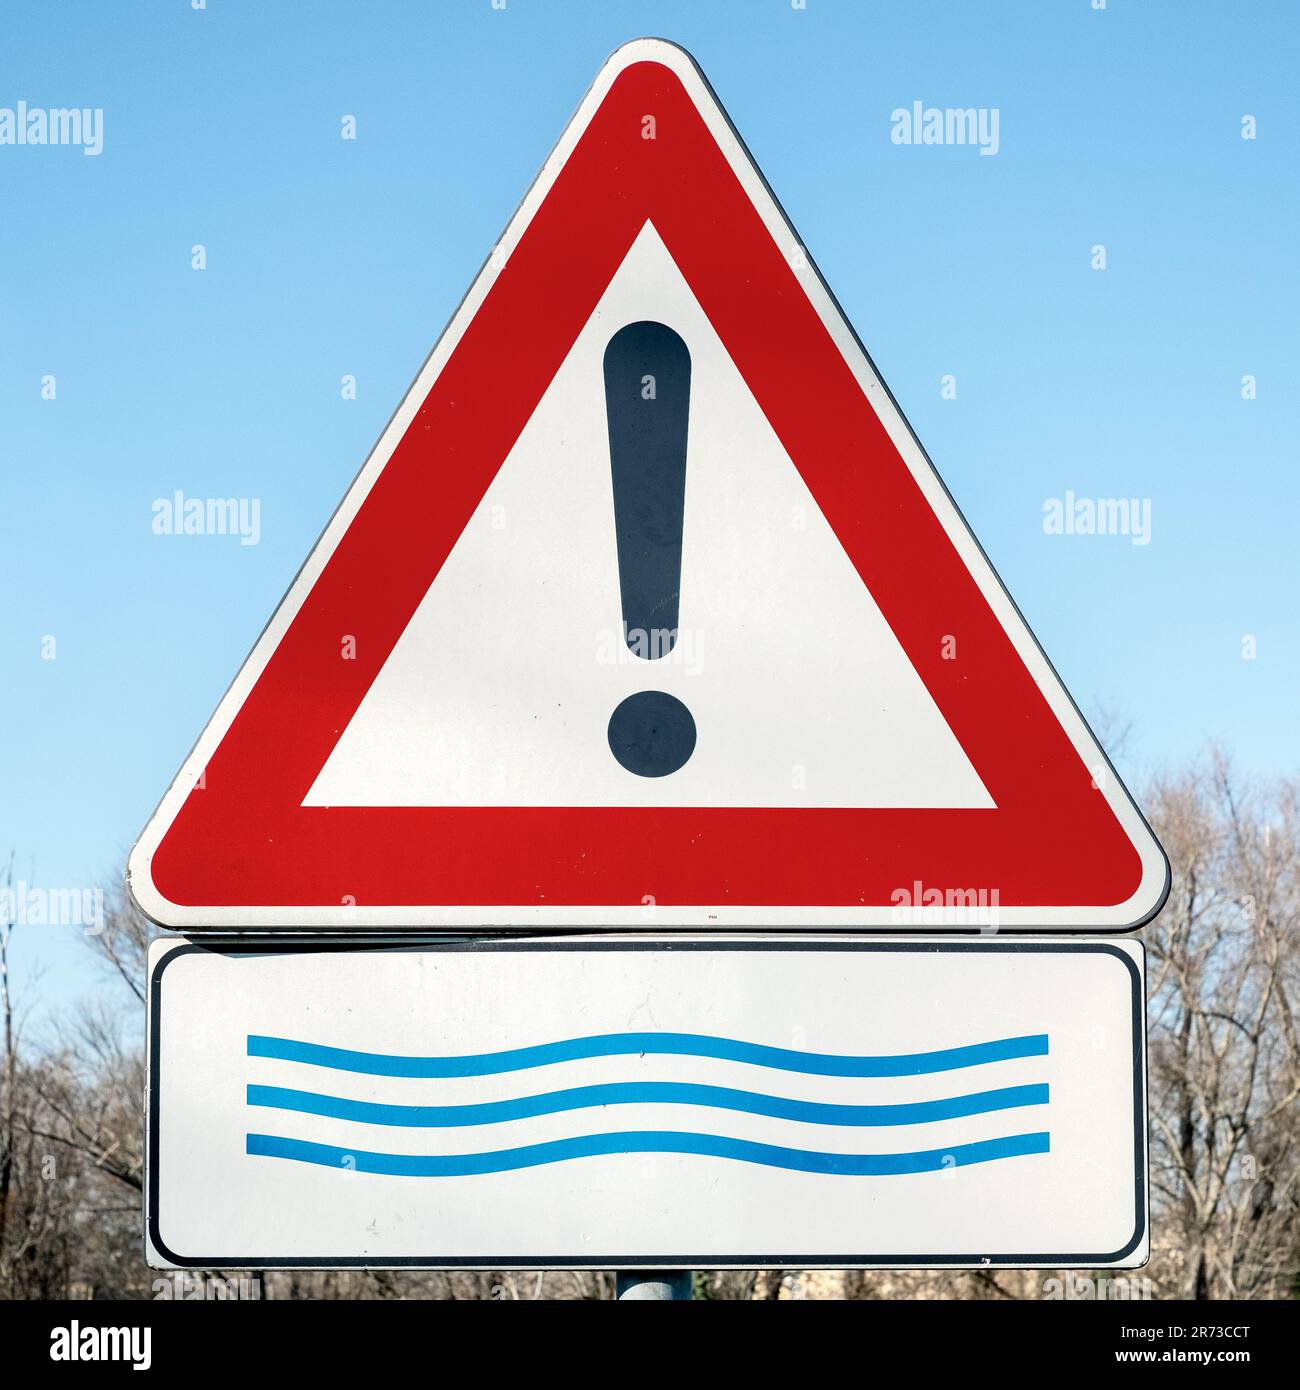 The road sign warning of the danger of flooding. Emilia-Romagna, Italy Stock Photo